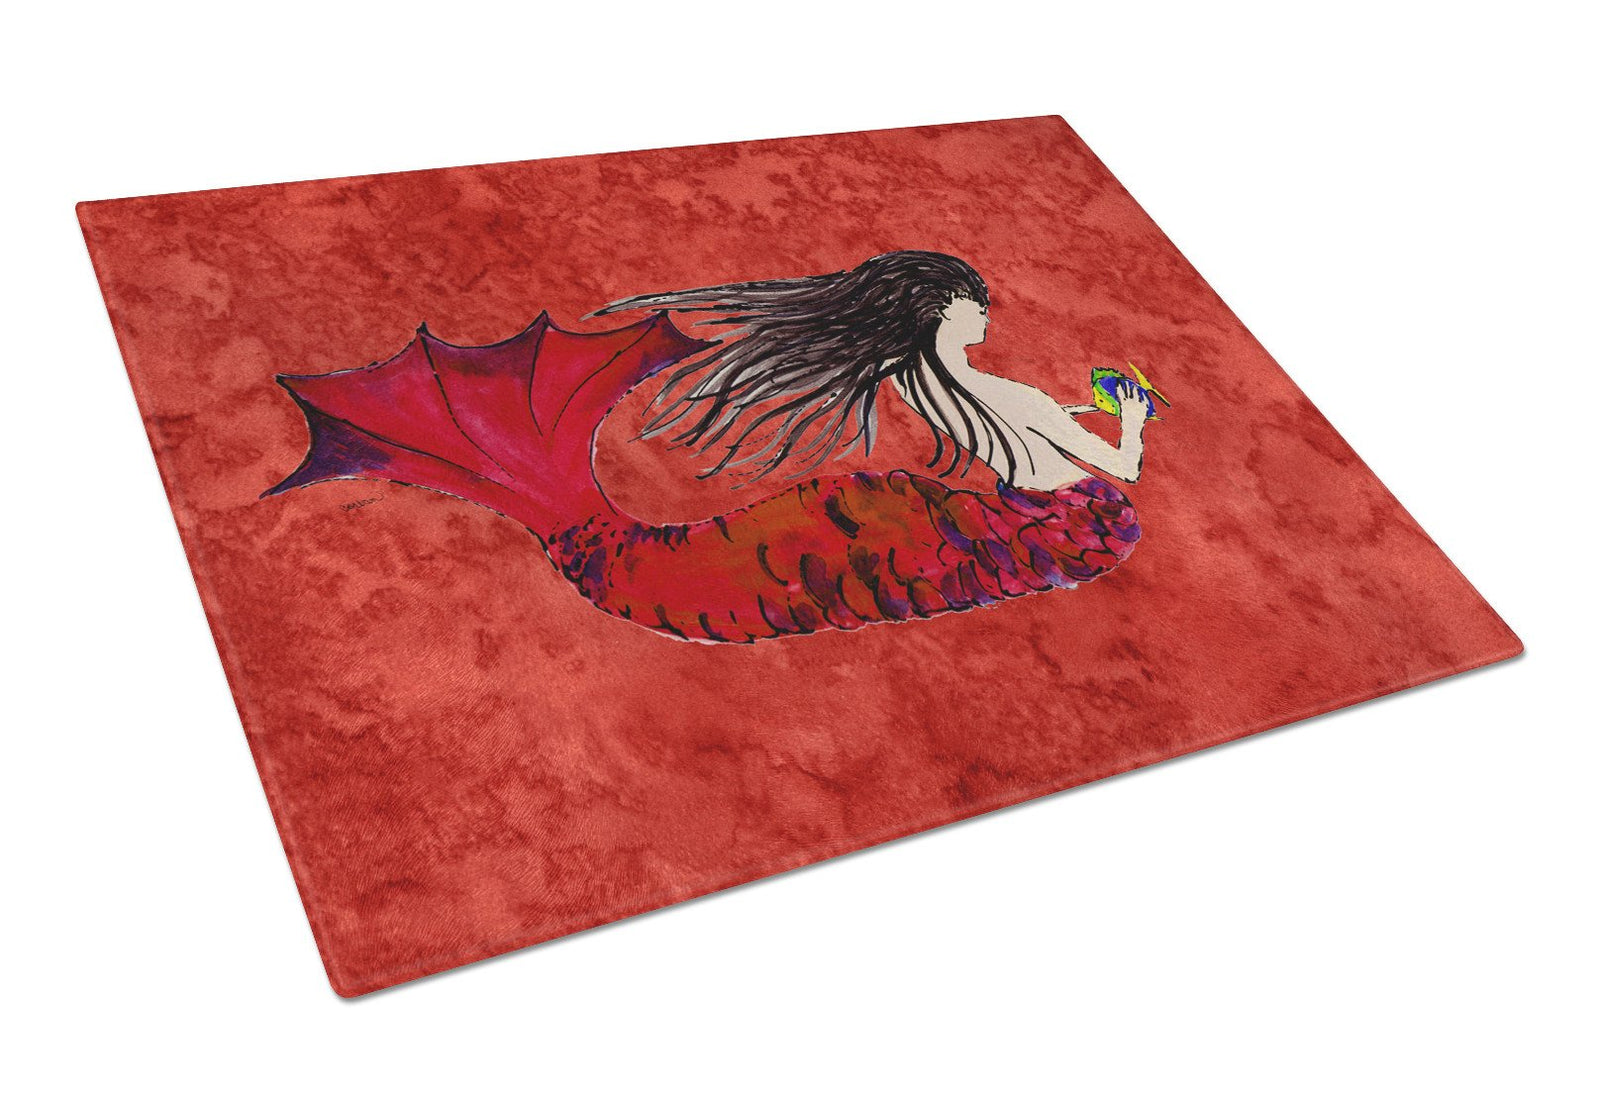 Black Haired Mermaid on Red Glass Cutting Board Large 8726LCB by Caroline's Treasures